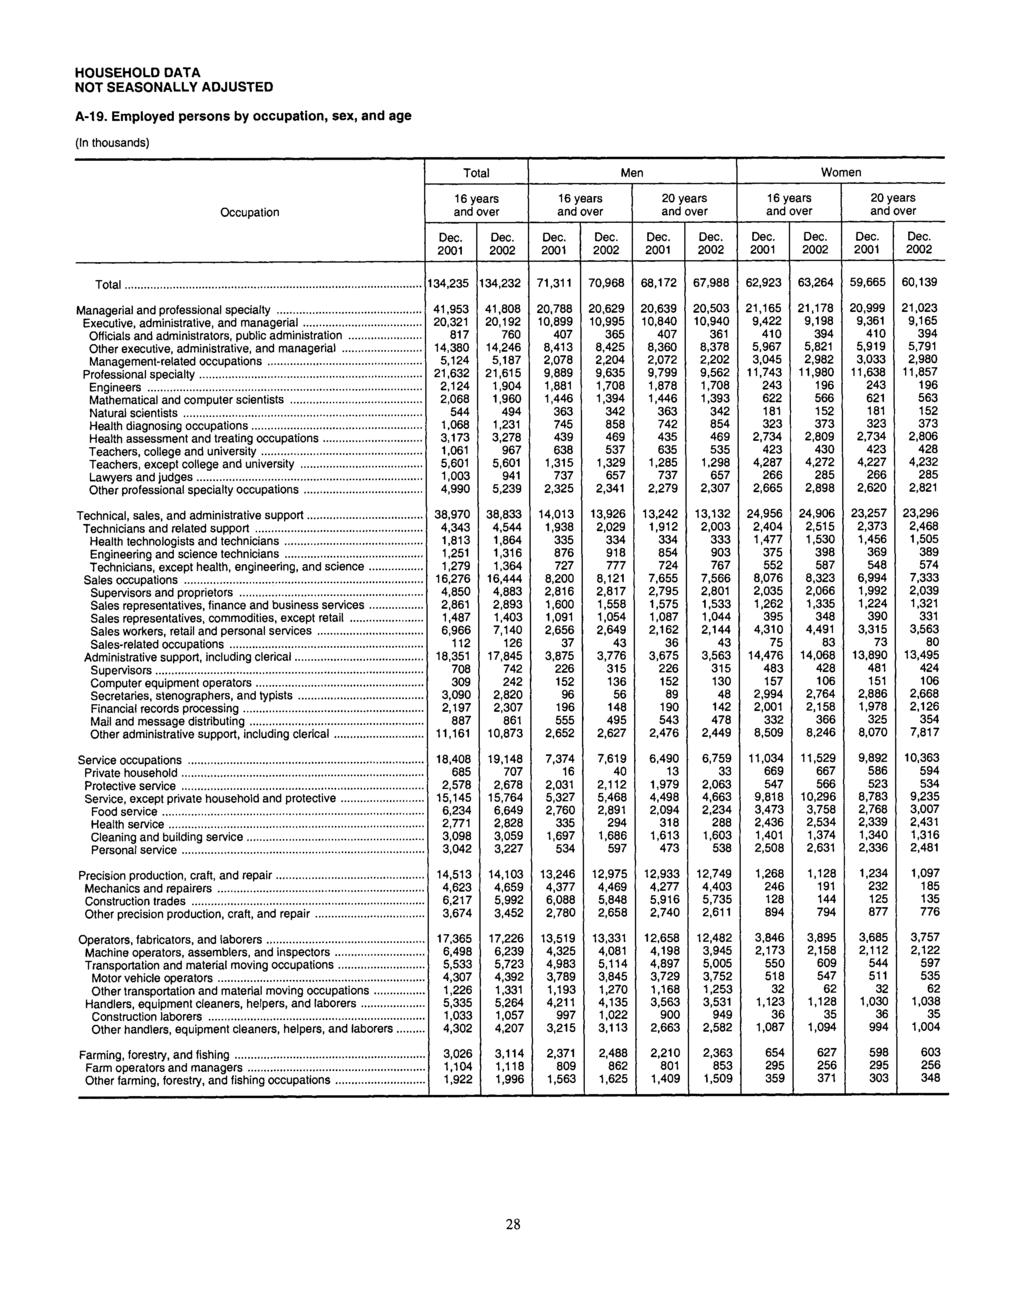 A-19. Employed persons by occupation, sex, and age (In thousands) Total Men Women 16 years 16 years 20 years 16 years 20 years Occupation and over and over and over and over and over Total 134,235